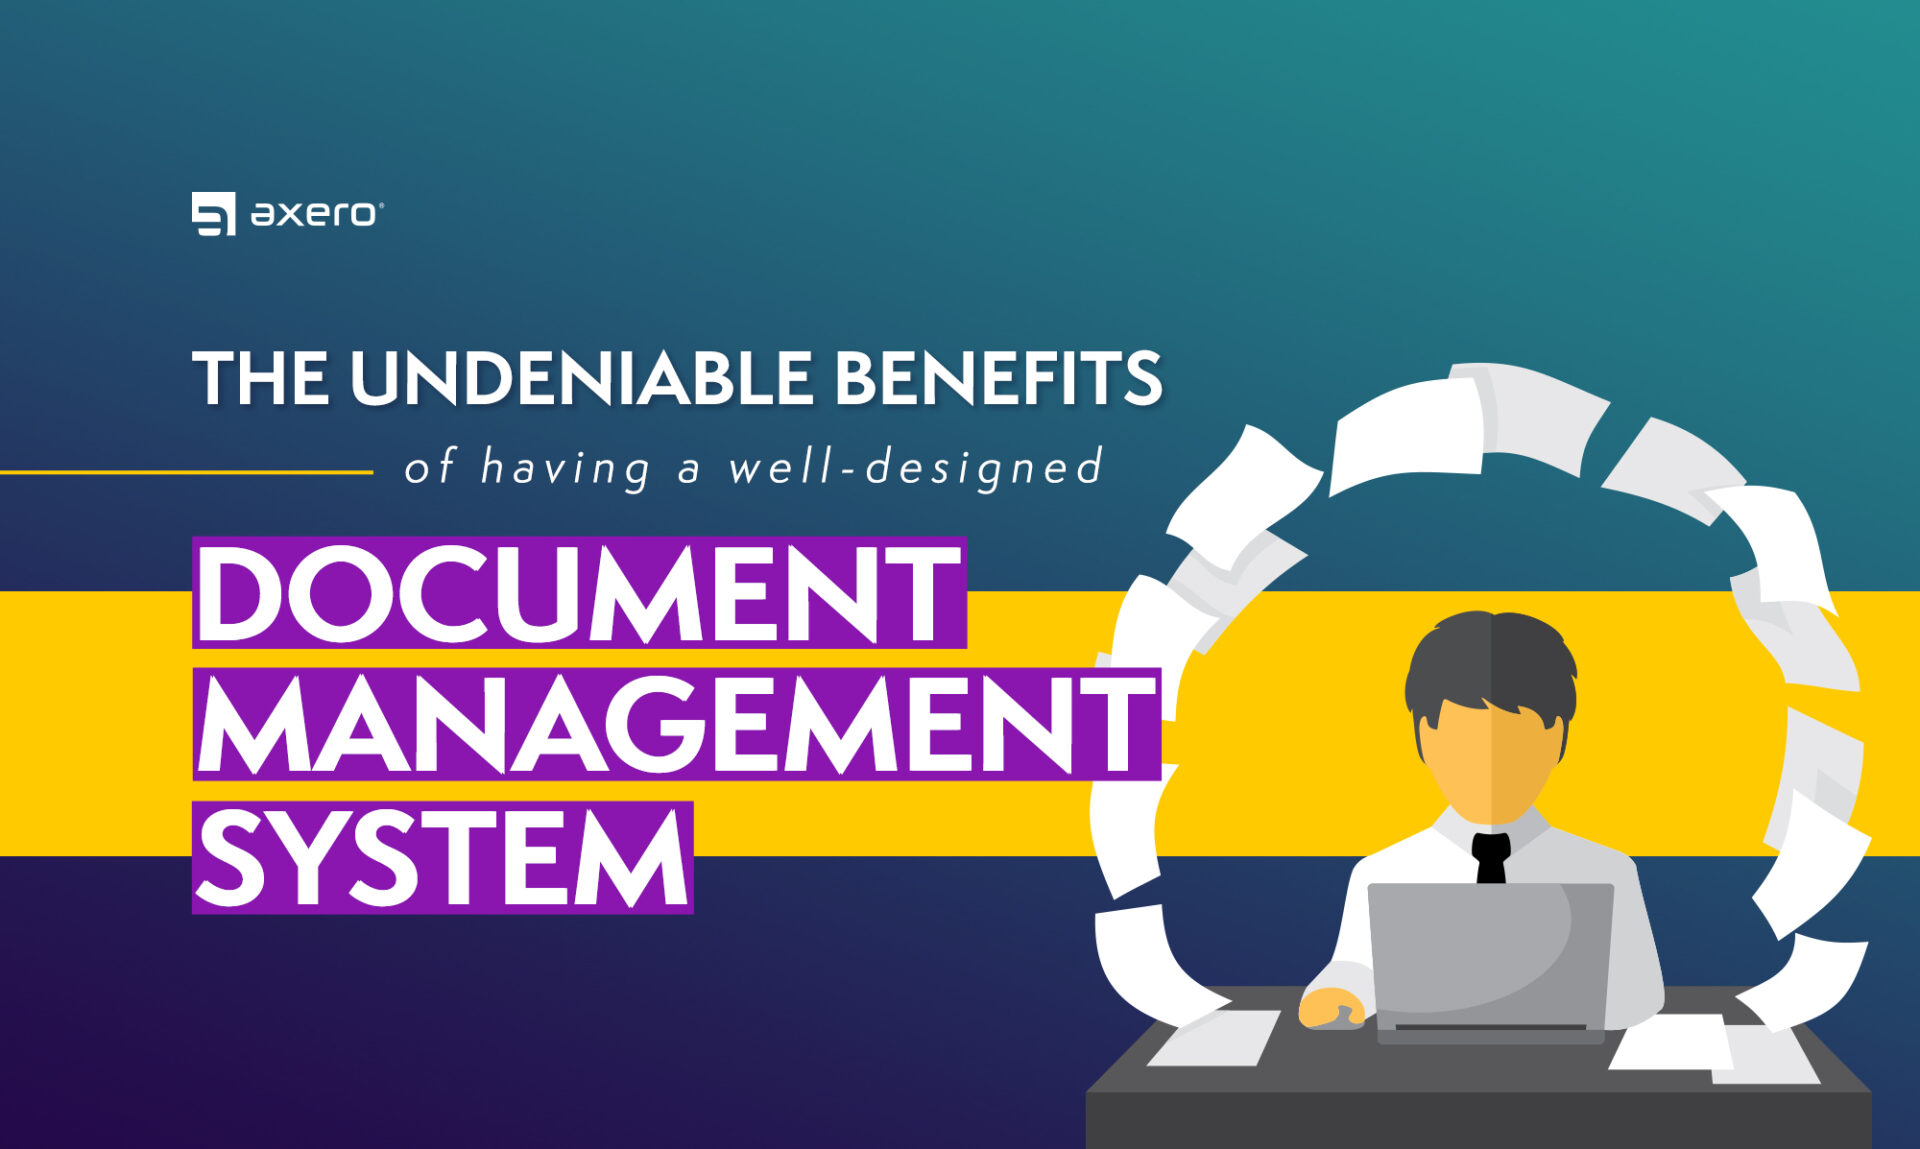 The Undeniable Benefits of Having a Well-Designed Document Management System